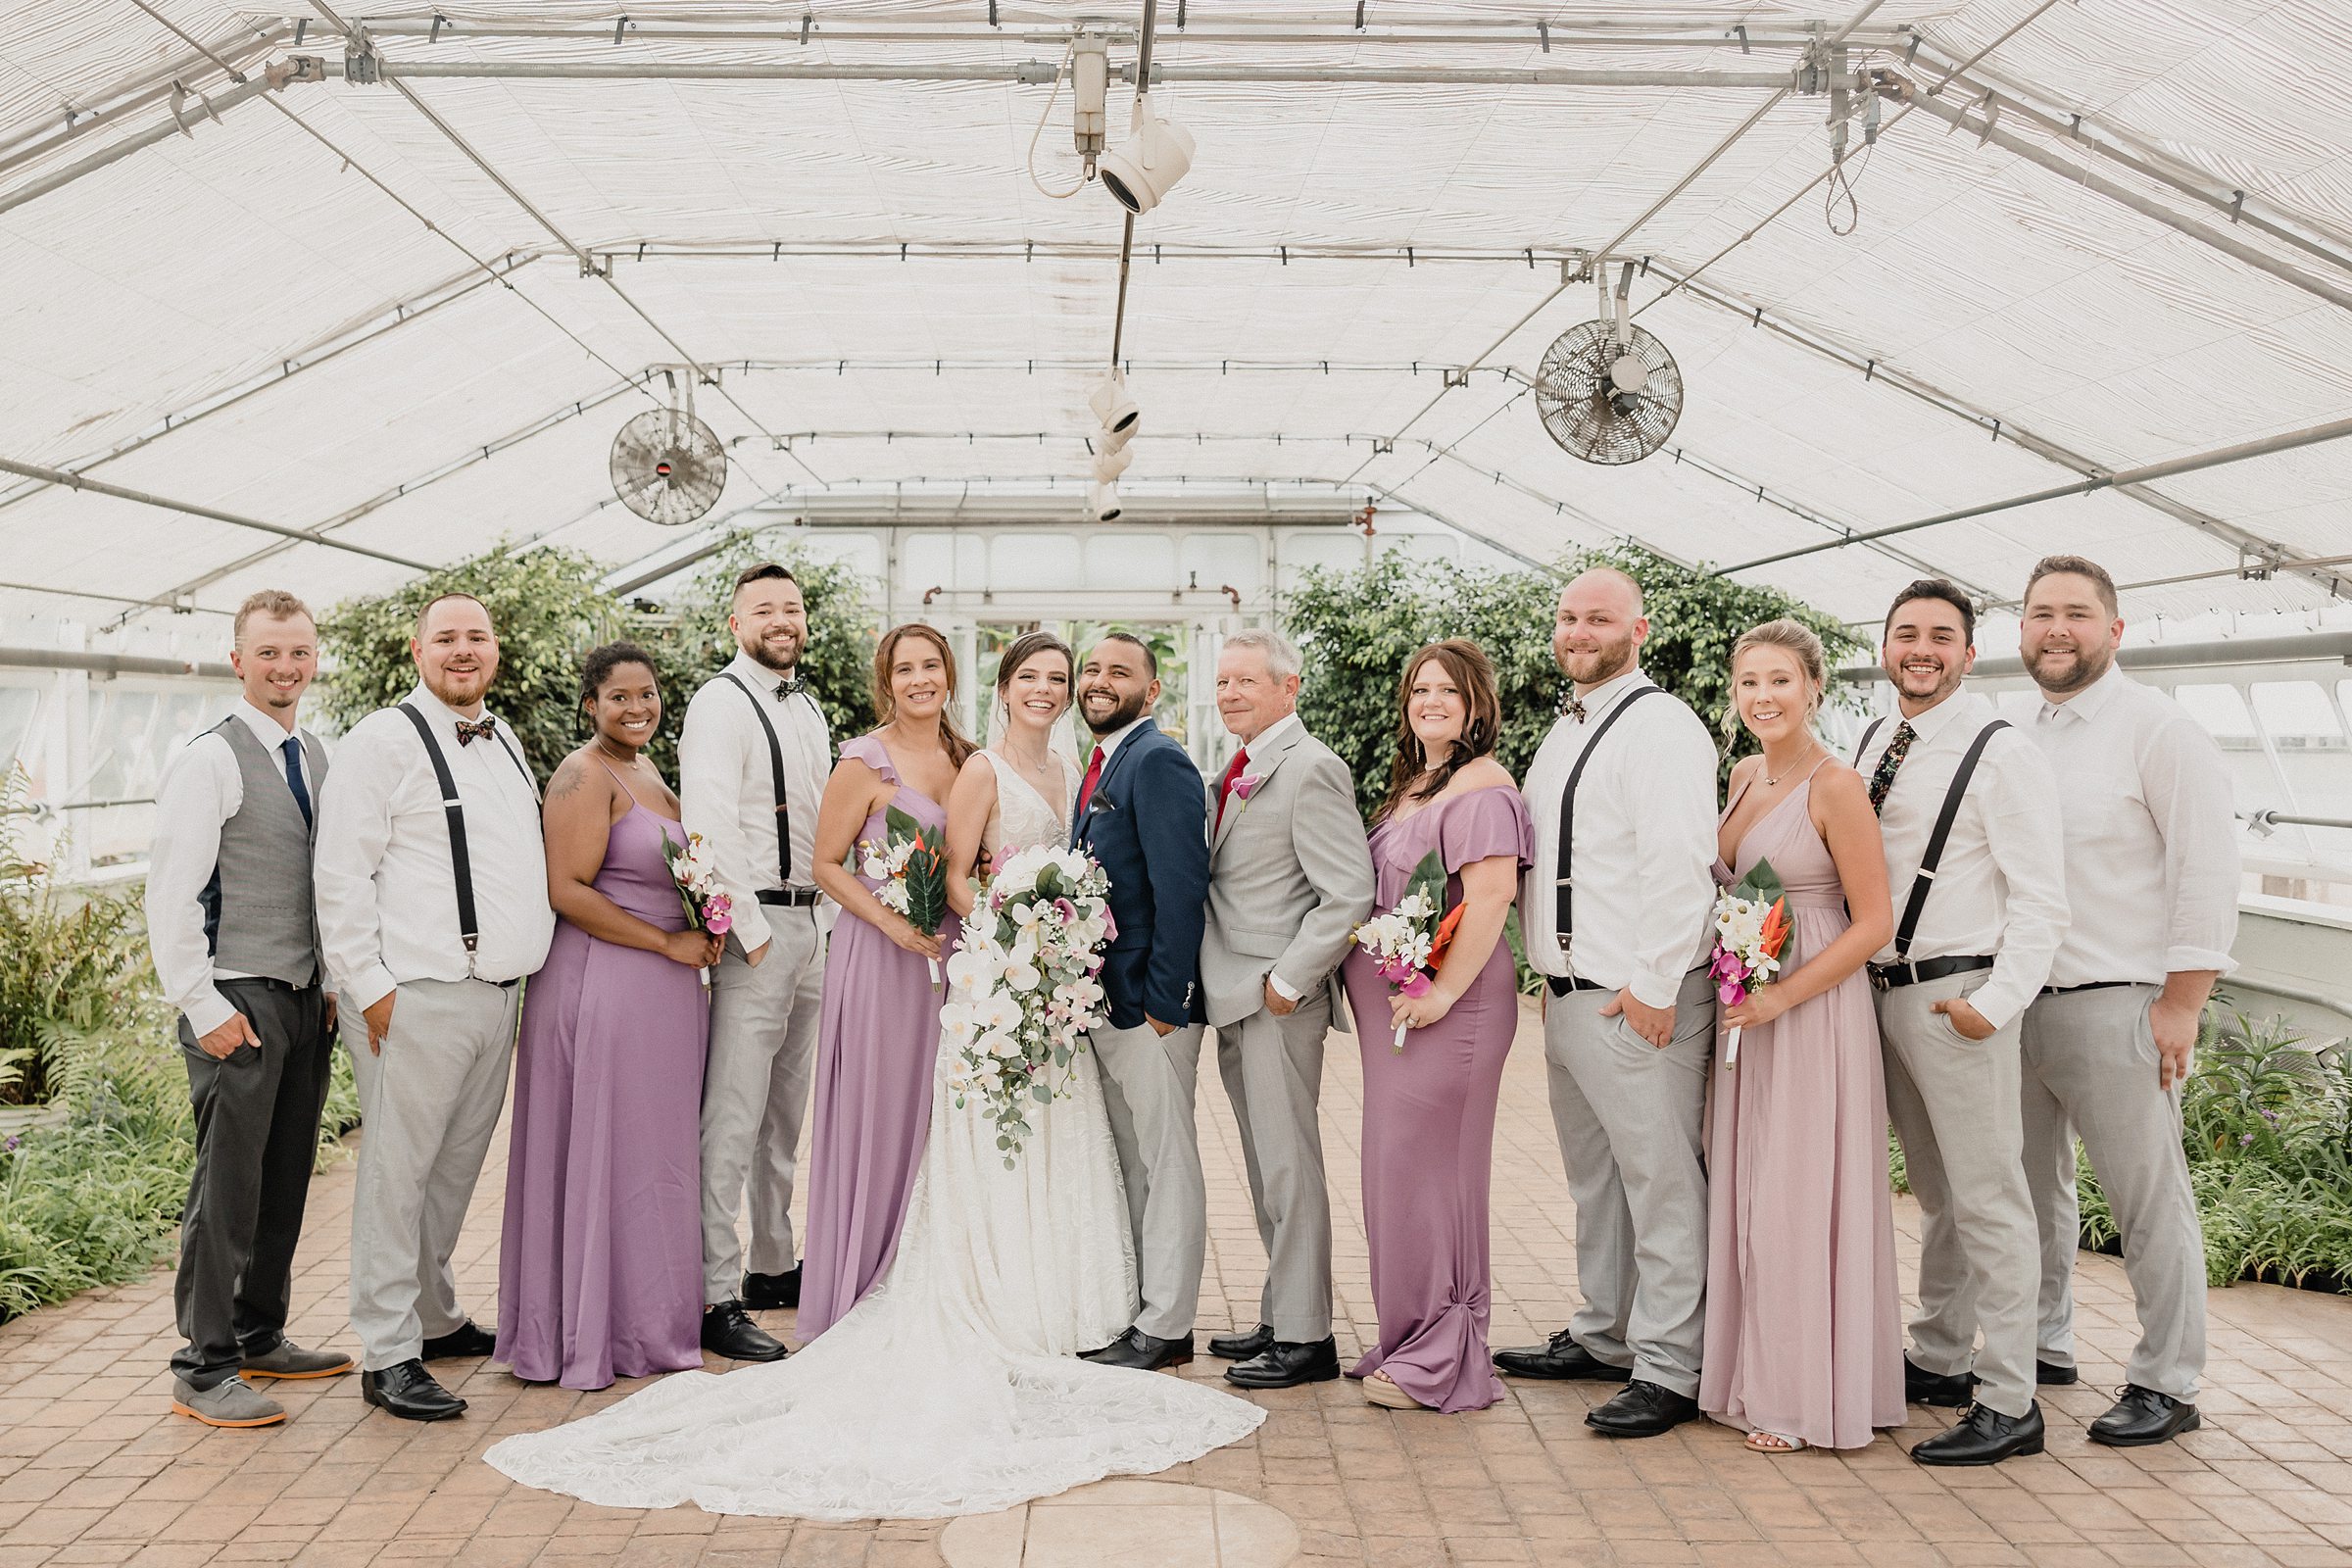 Full bridal party during a wedding at the Bird Haven Greenhouse & Conservatory in Joliet, Illinois.